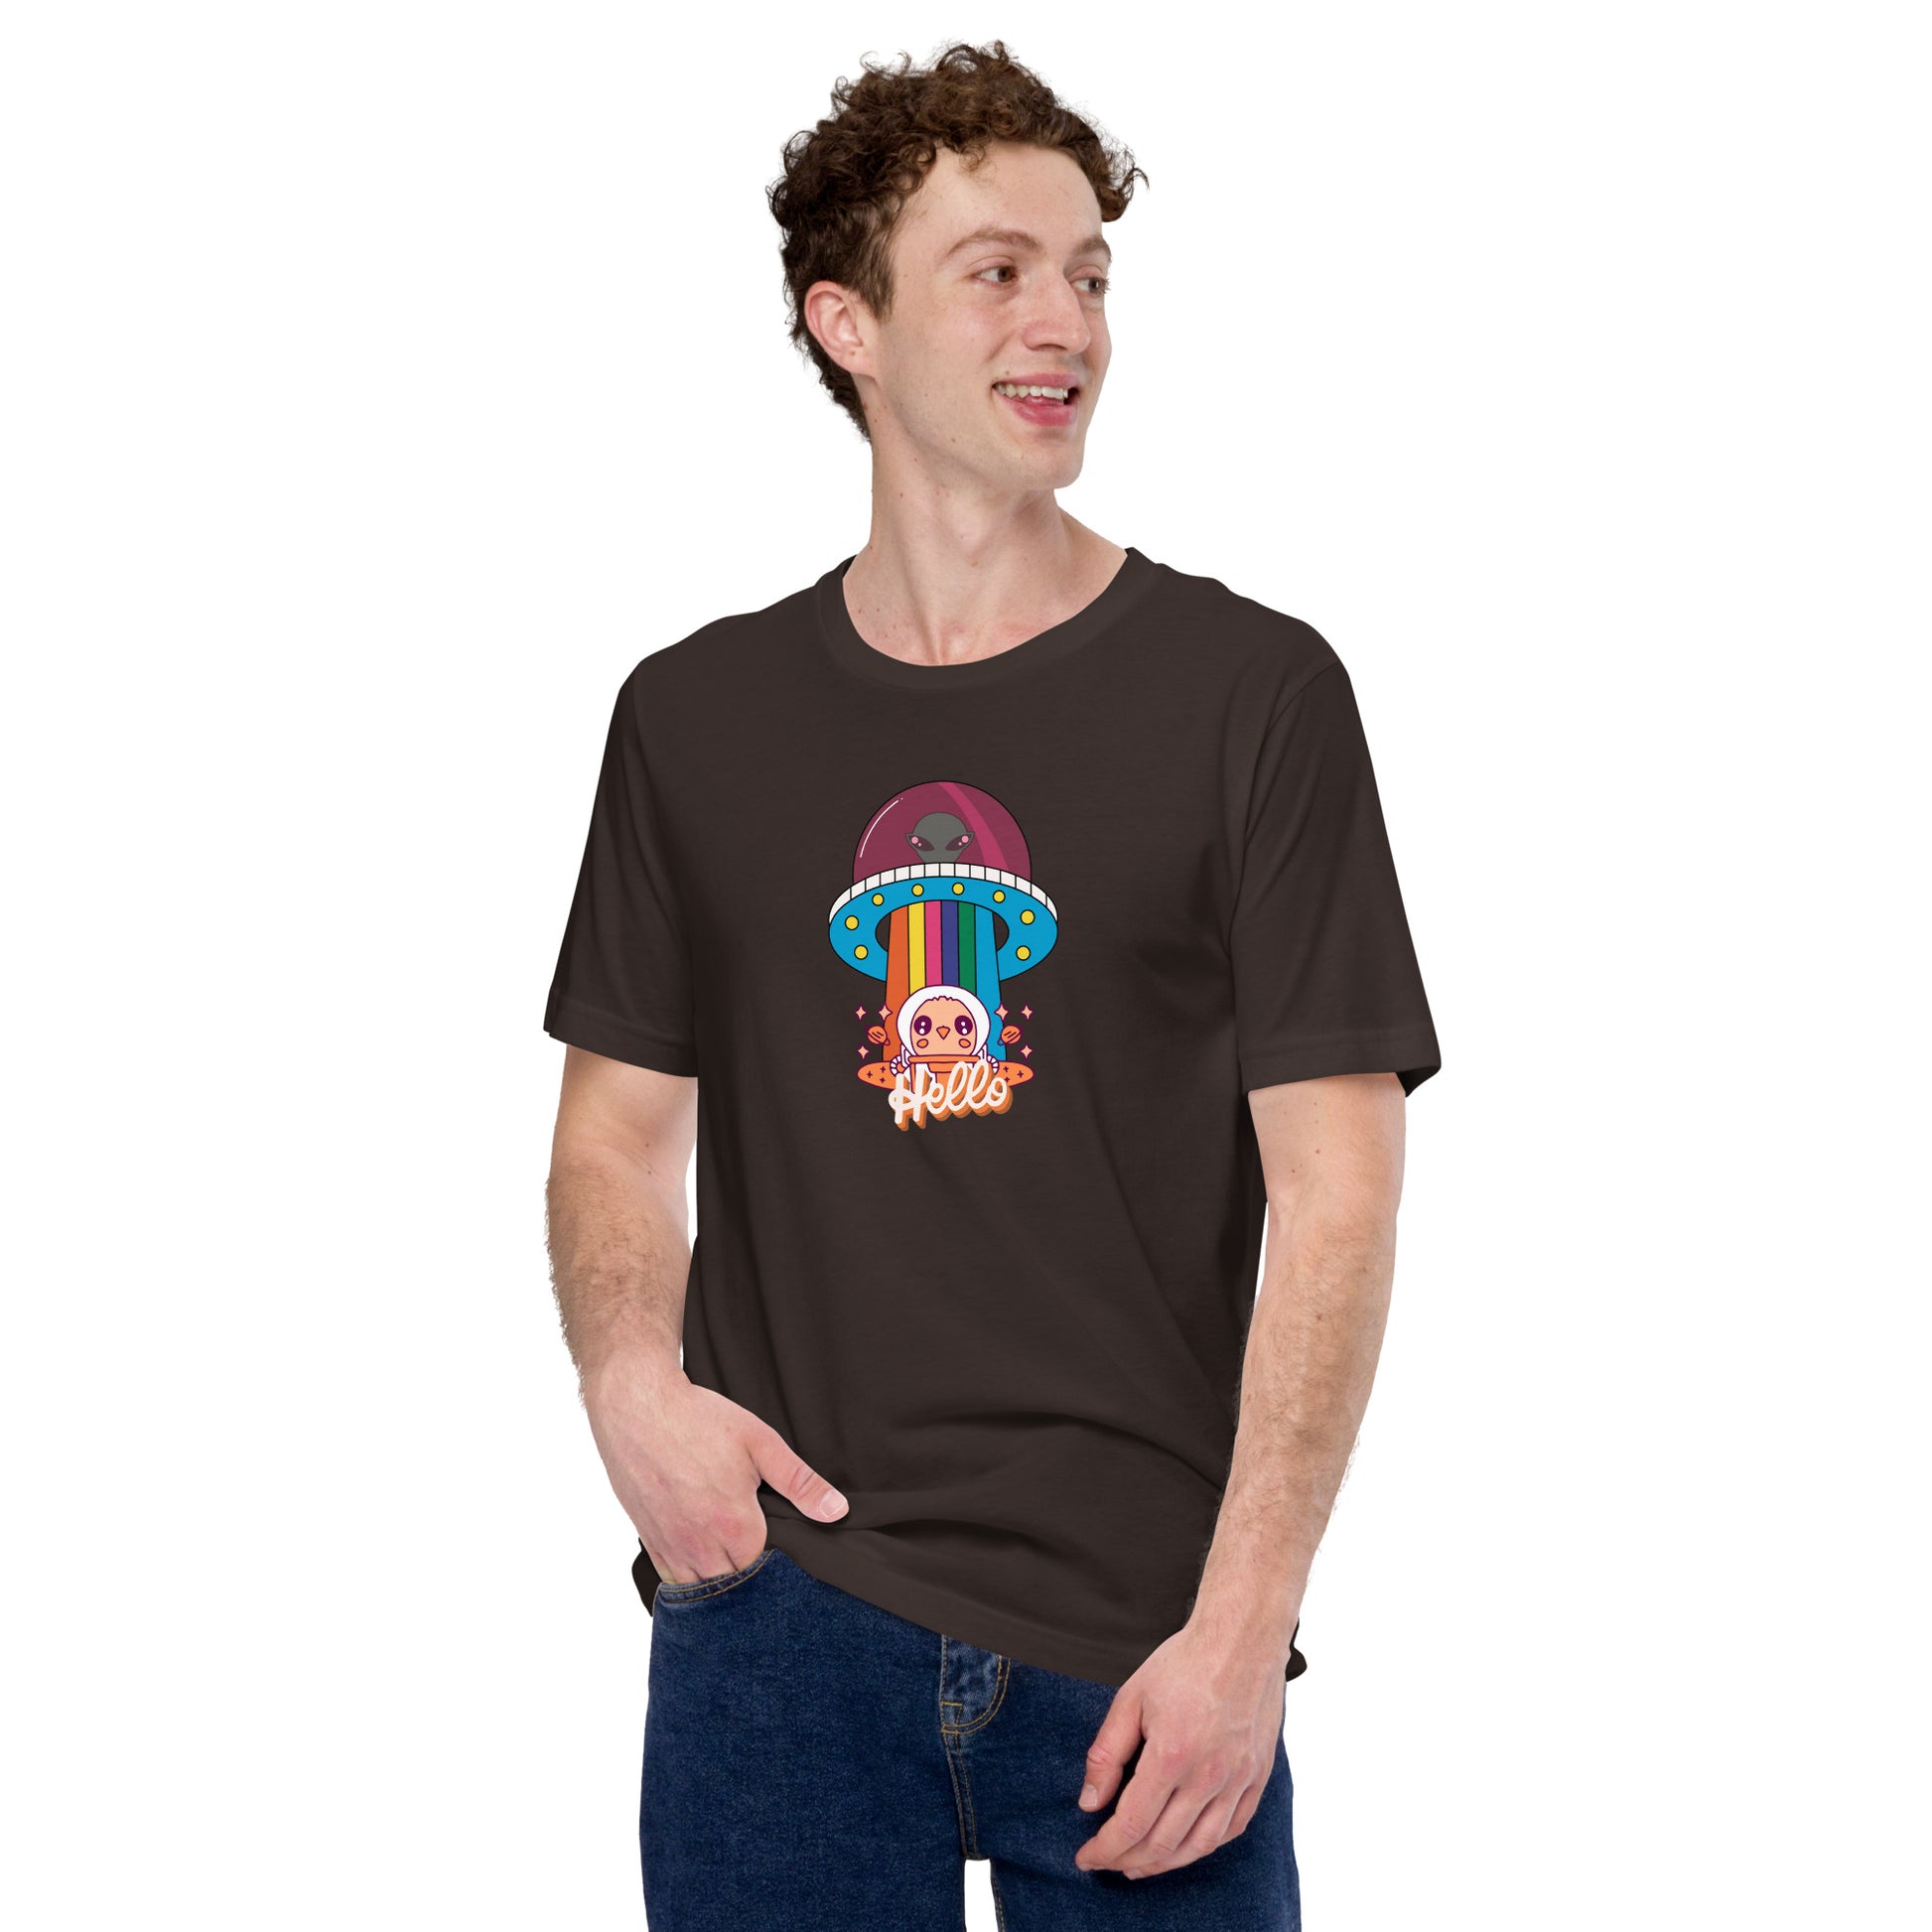 Cute Hello Unisex T-Shirt - Spread Smiles with Adorable Comfort